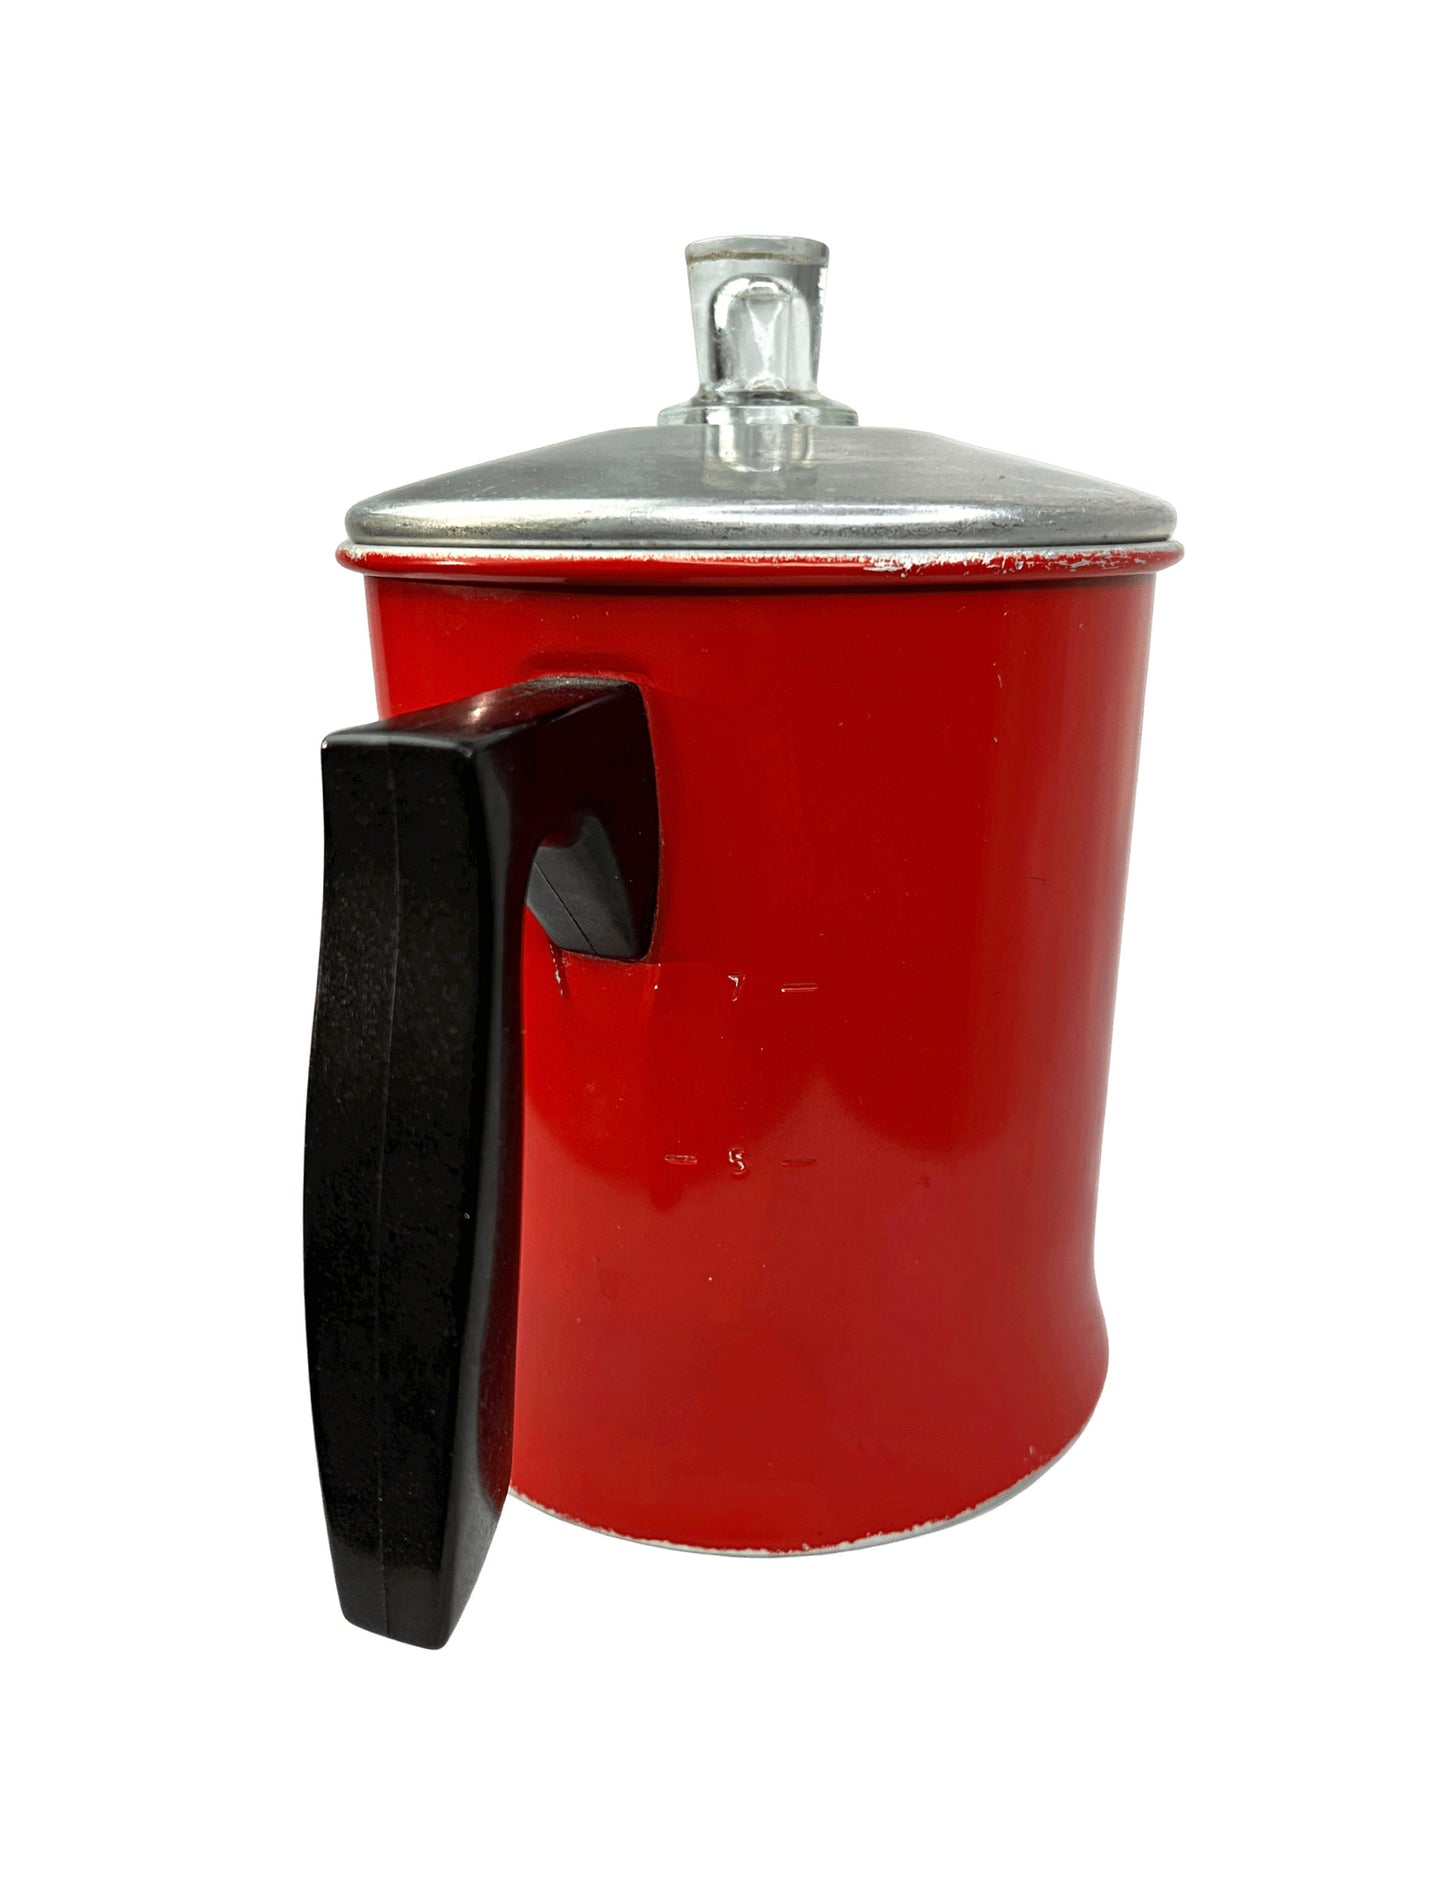 50’s Red Aluminum Chiltonware Camping Coffee Tea Kettle